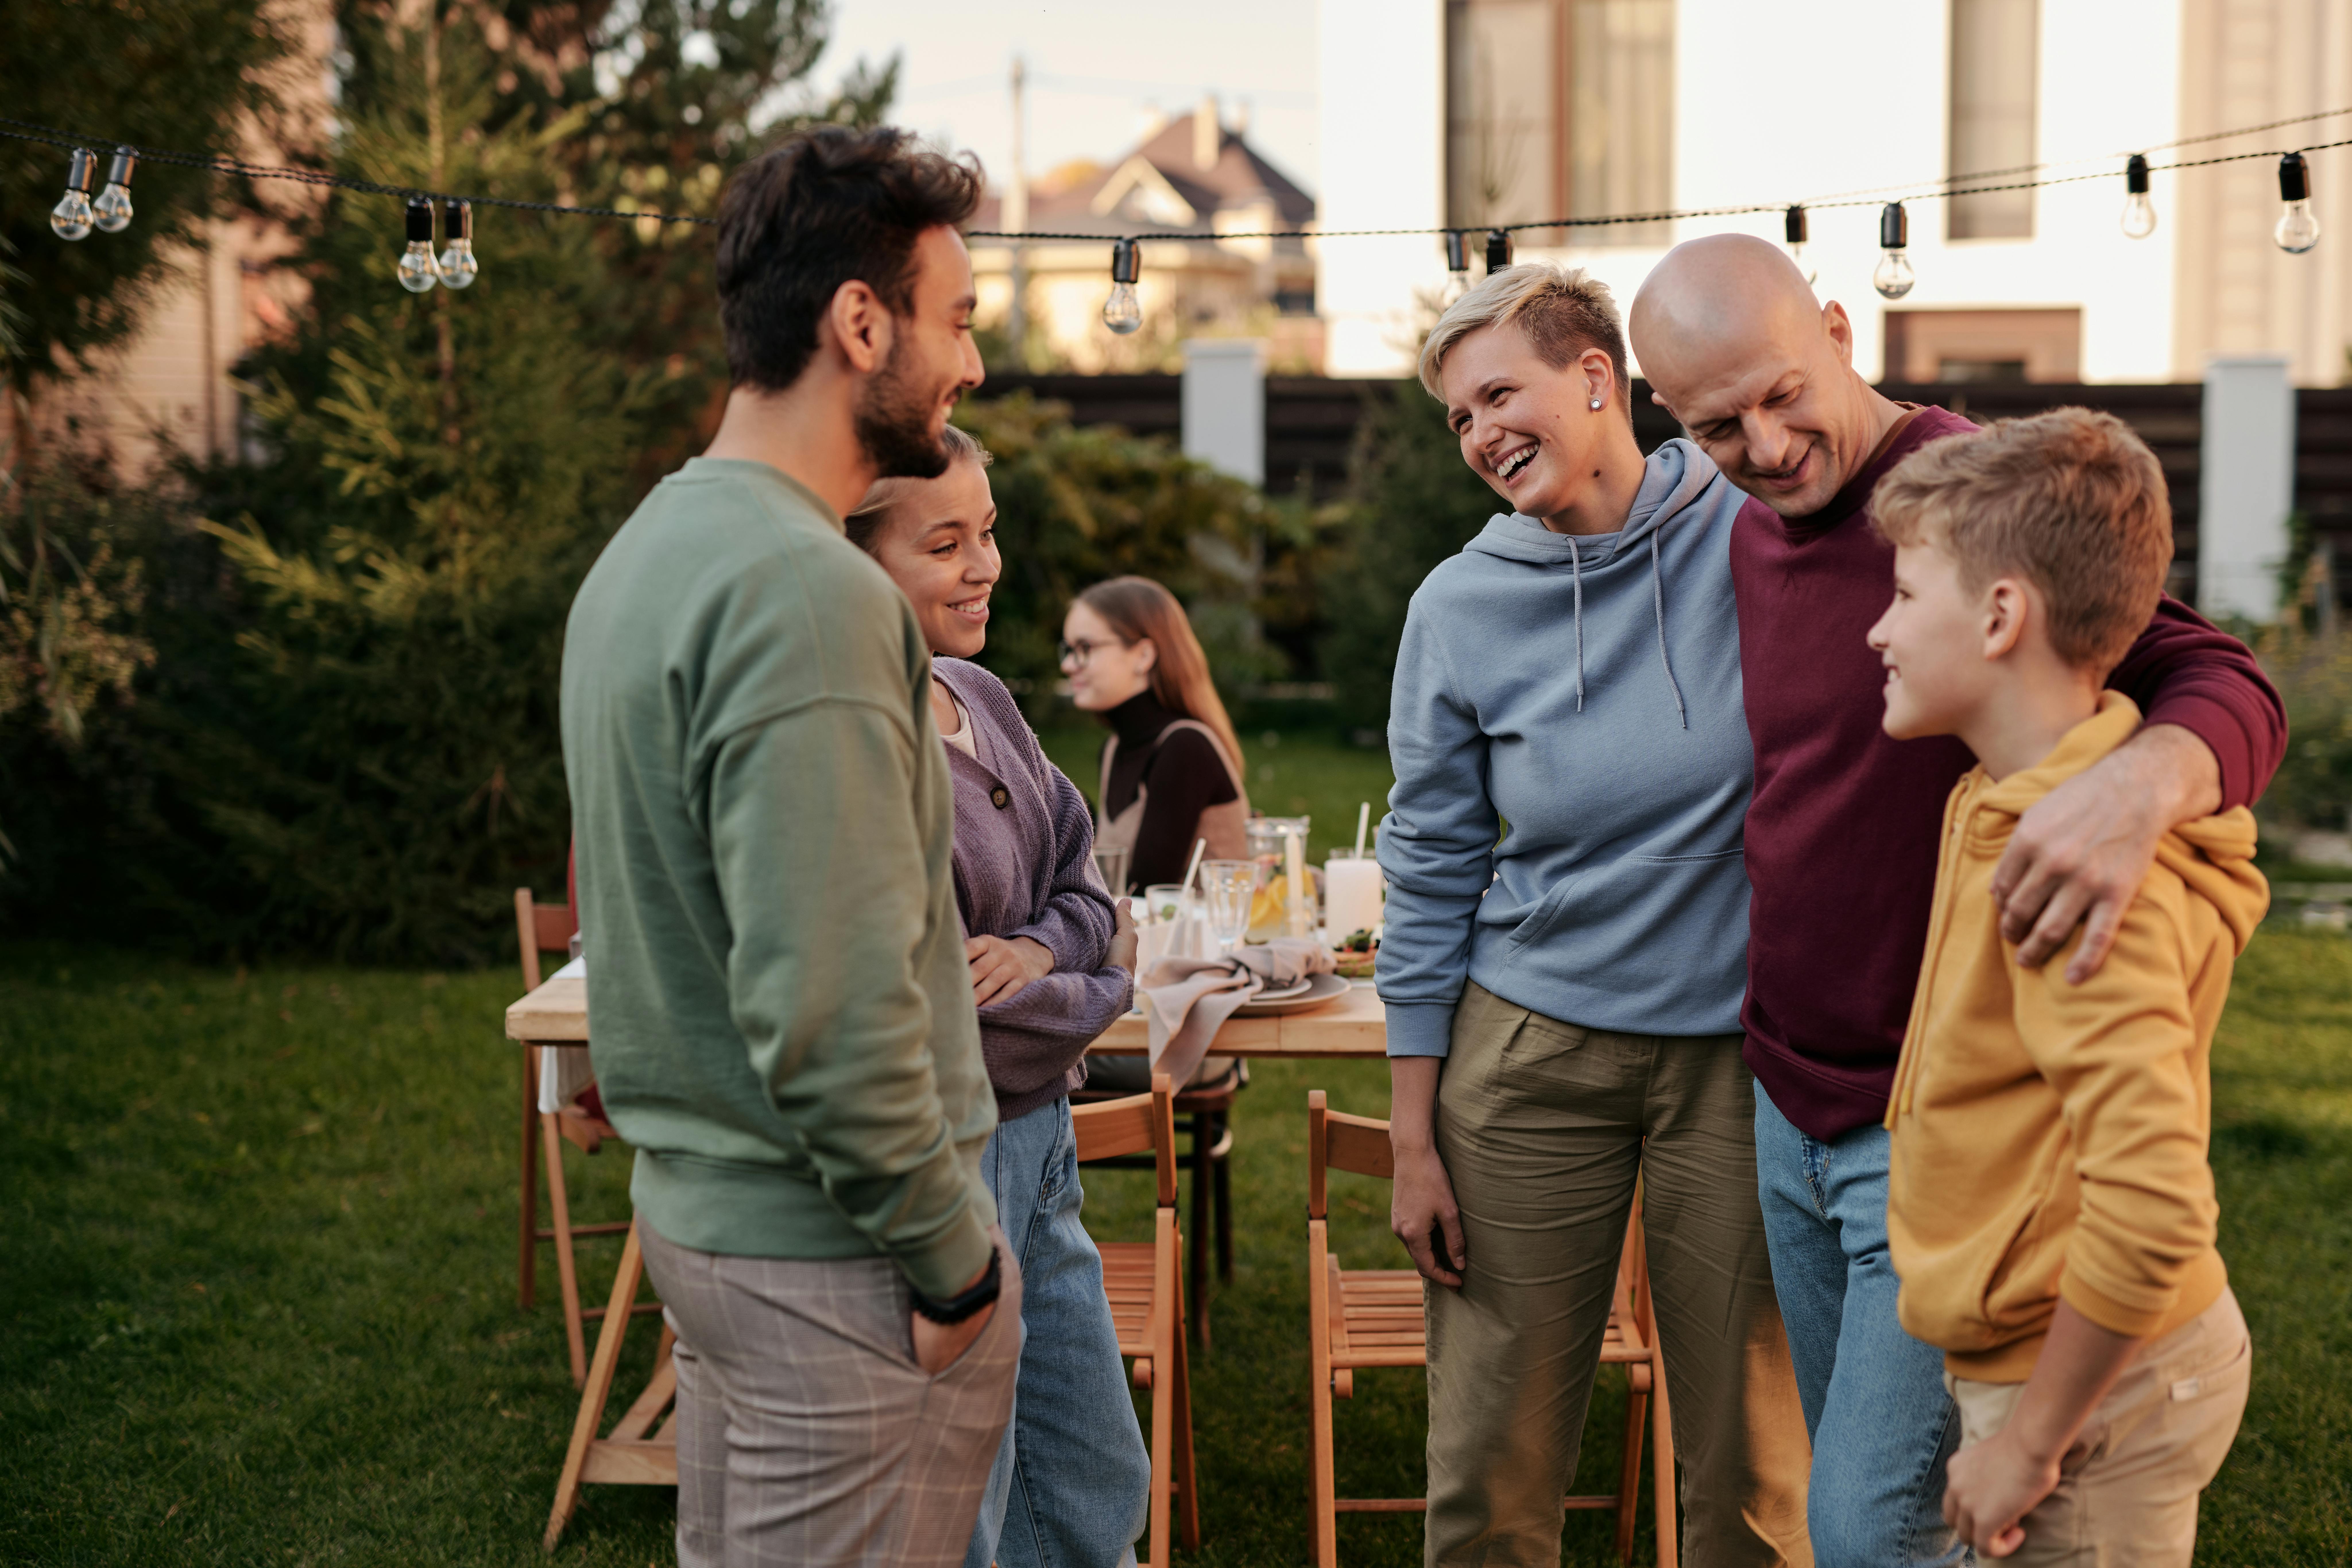 A family conversing during a get-together | Source: Pexels